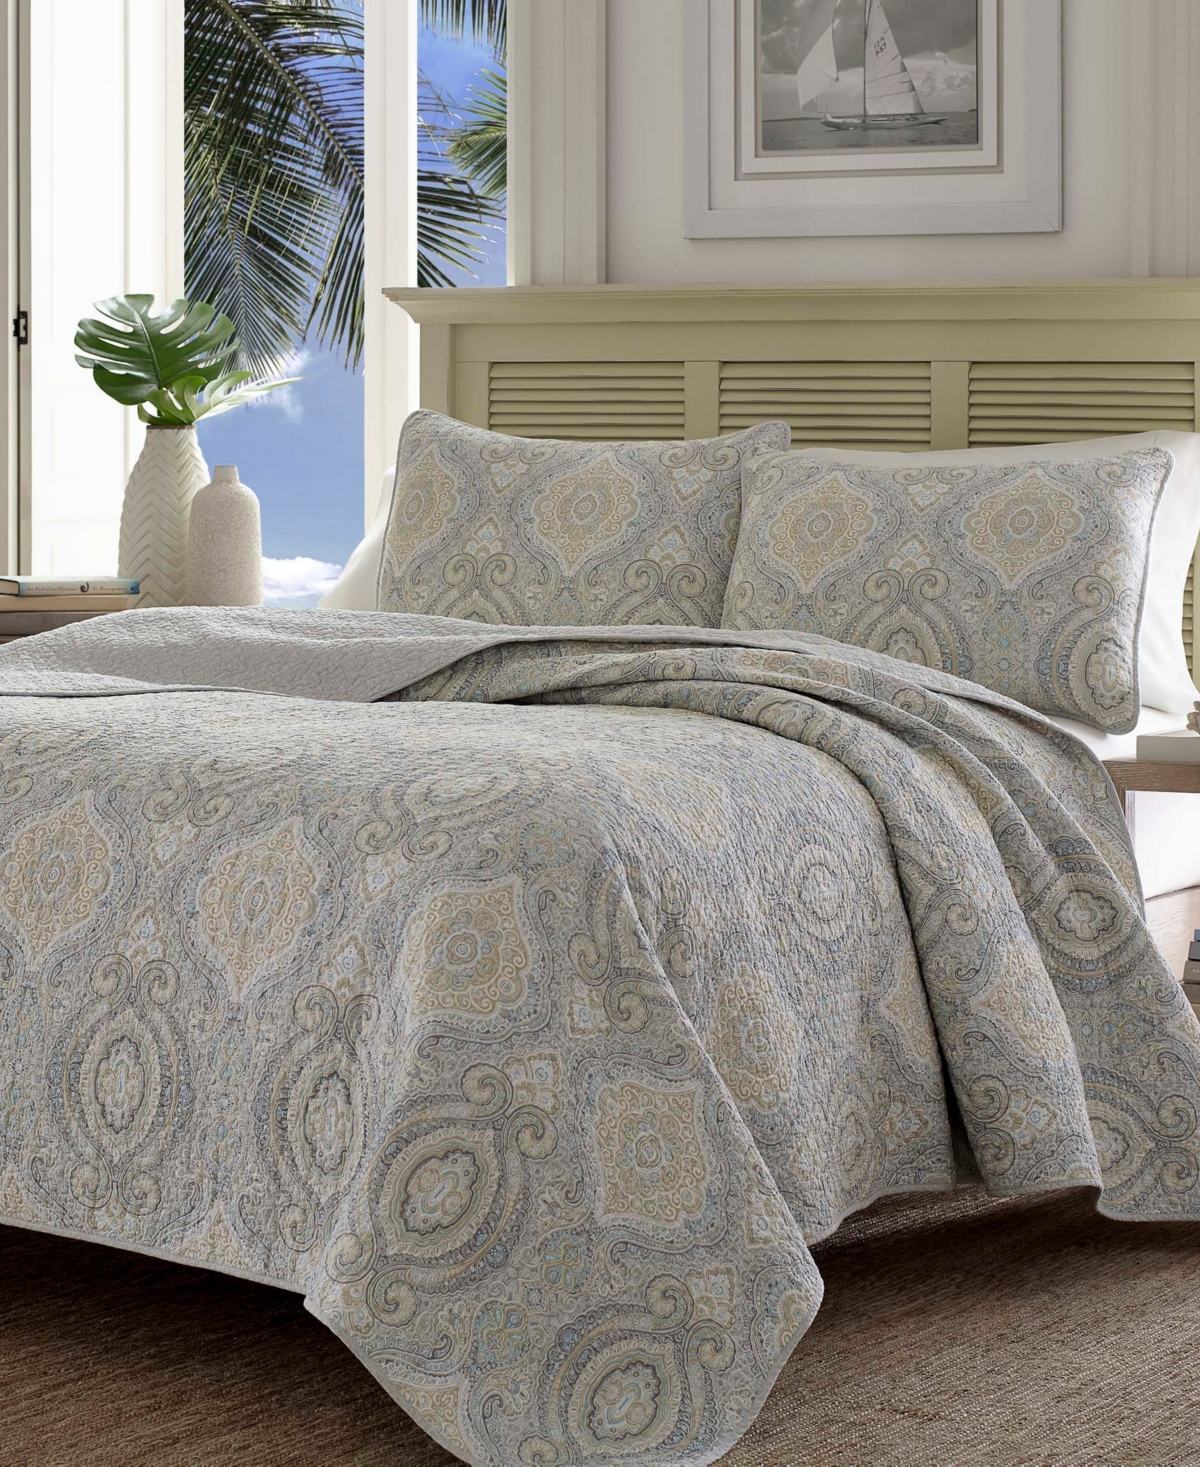 TOMMY BAHAMA HOME TOMMY BAHAMA TURTLE COVE COTTON REVERSIBLE 3 PIECE QUILT SET, KING BEDDING